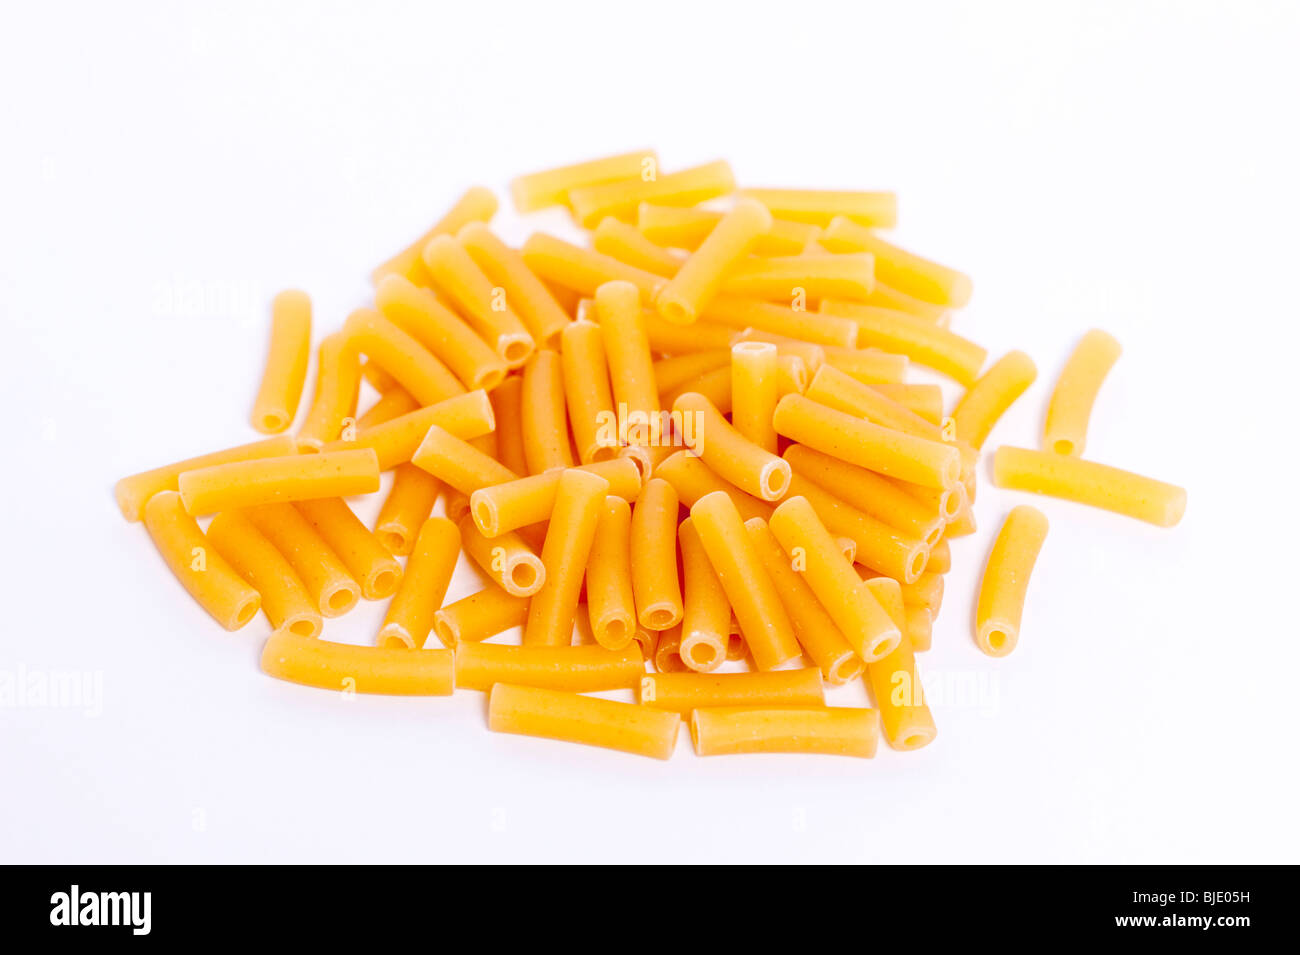 A pile of uncooked macaroni pasta tubes on a white background Stock Photo